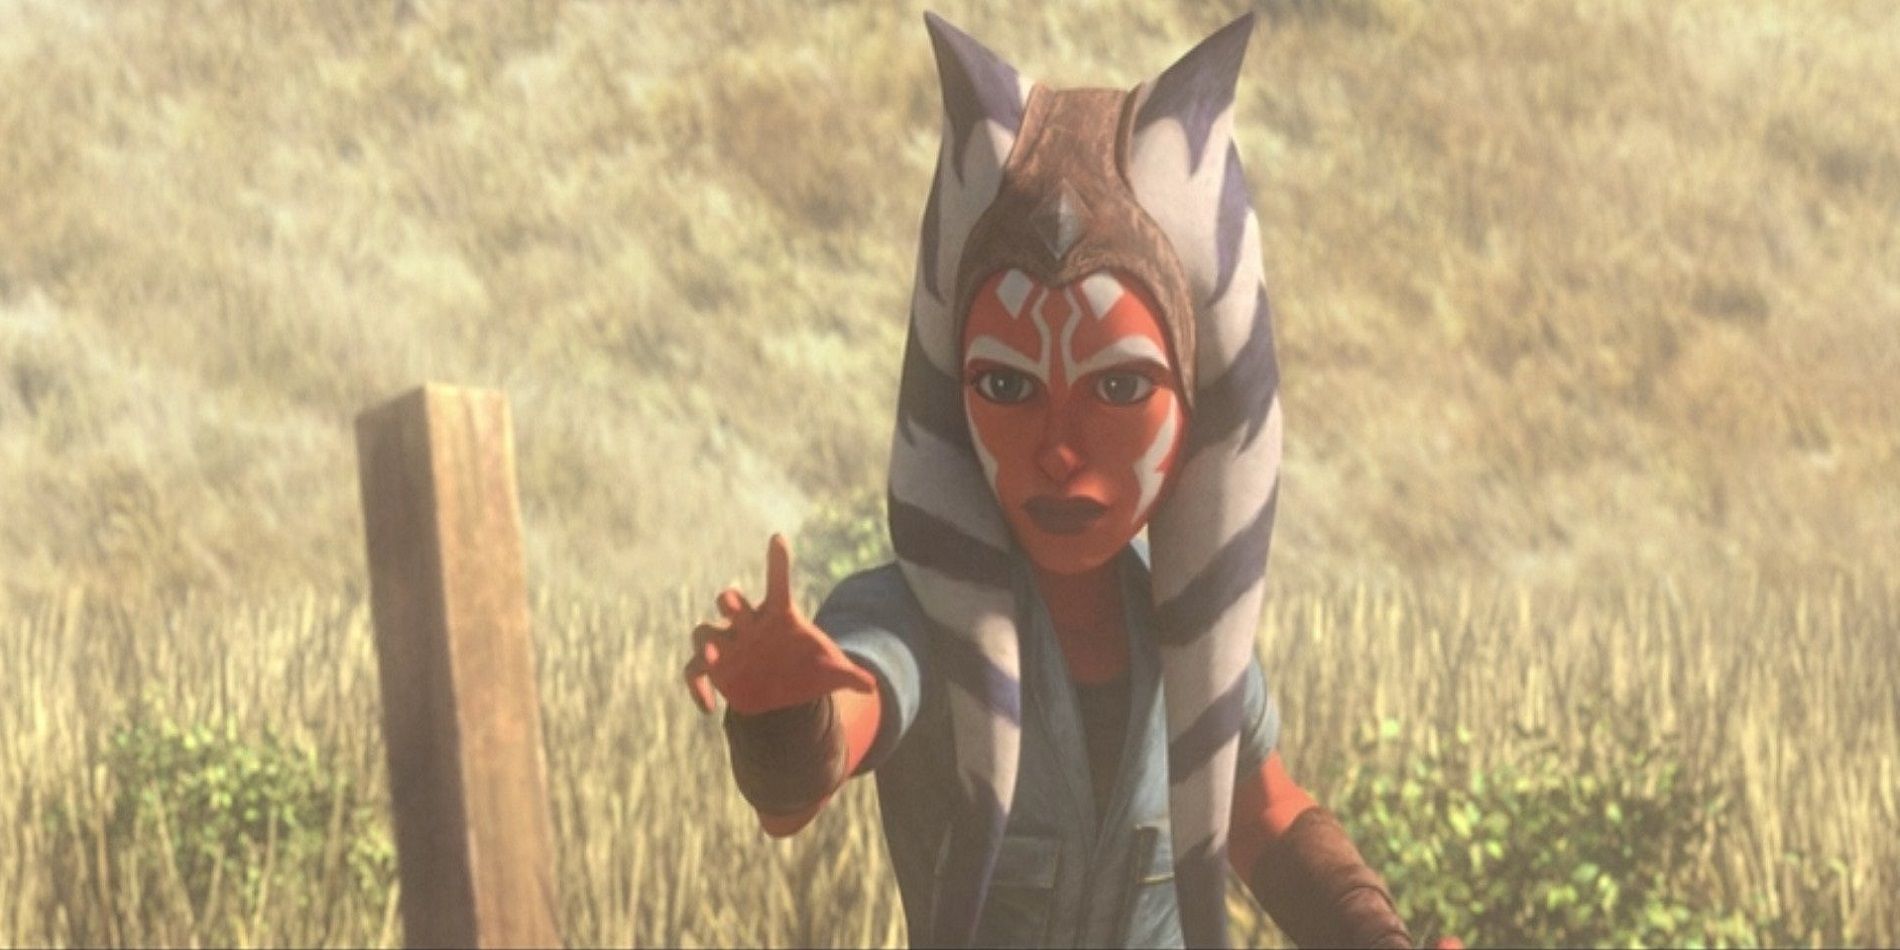 Ahsoka using the Force in Tales of the Jedi